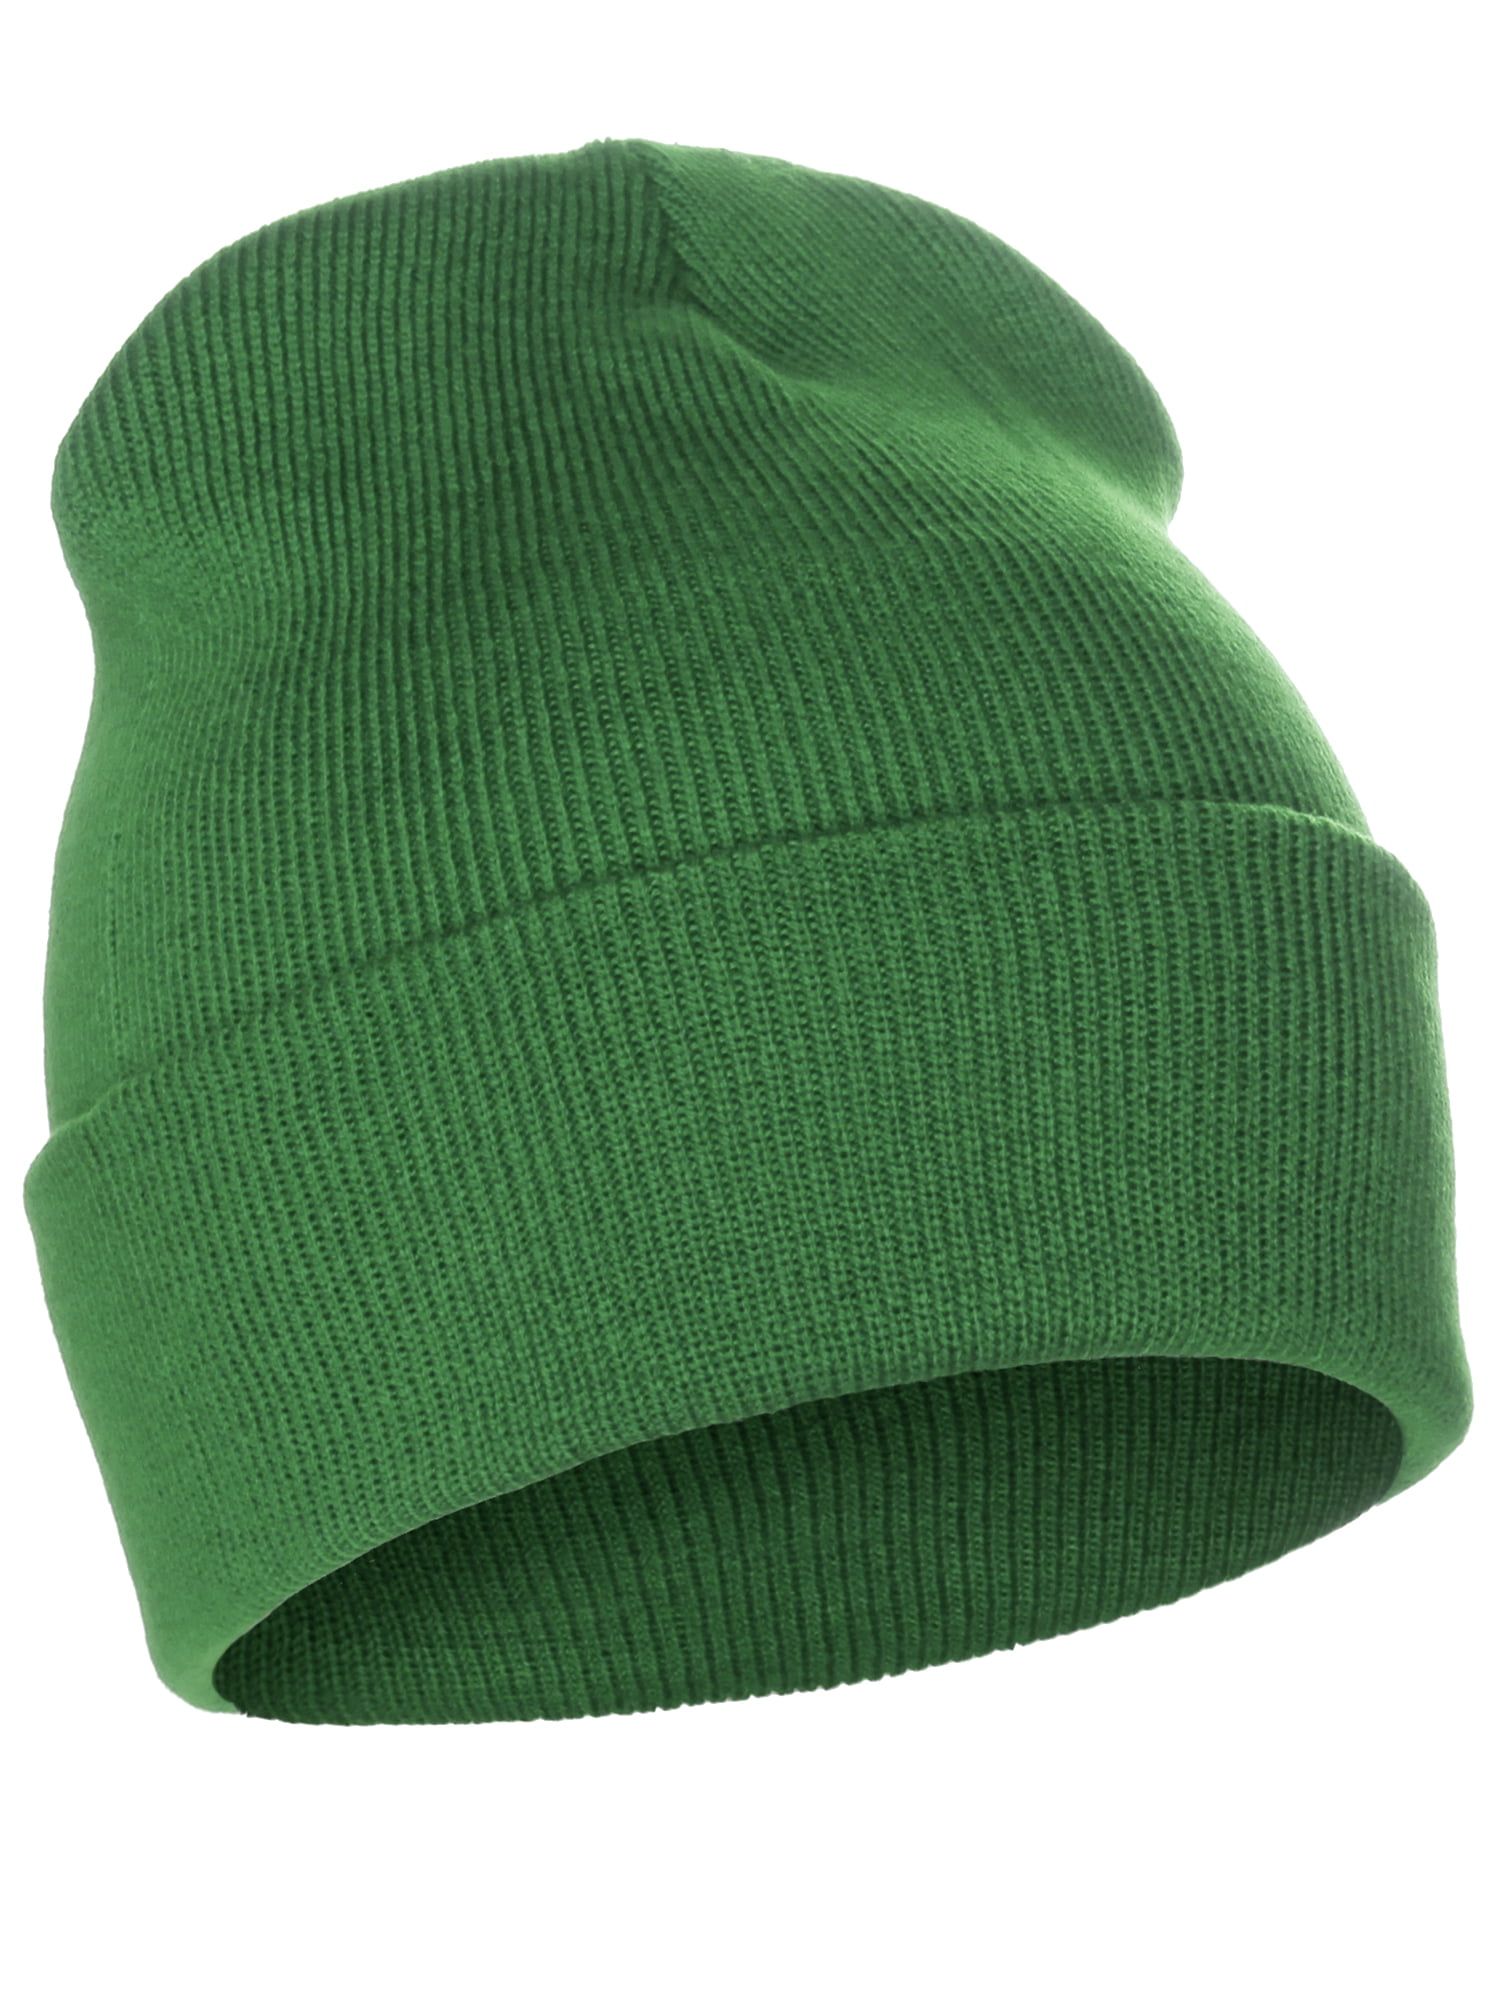 Connectyle Classic Men's Warm Winter Hats Acrylic Knit Cuff Beanie Cap  Daily Beanie Hat (Army Green) at  Men's Clothing store